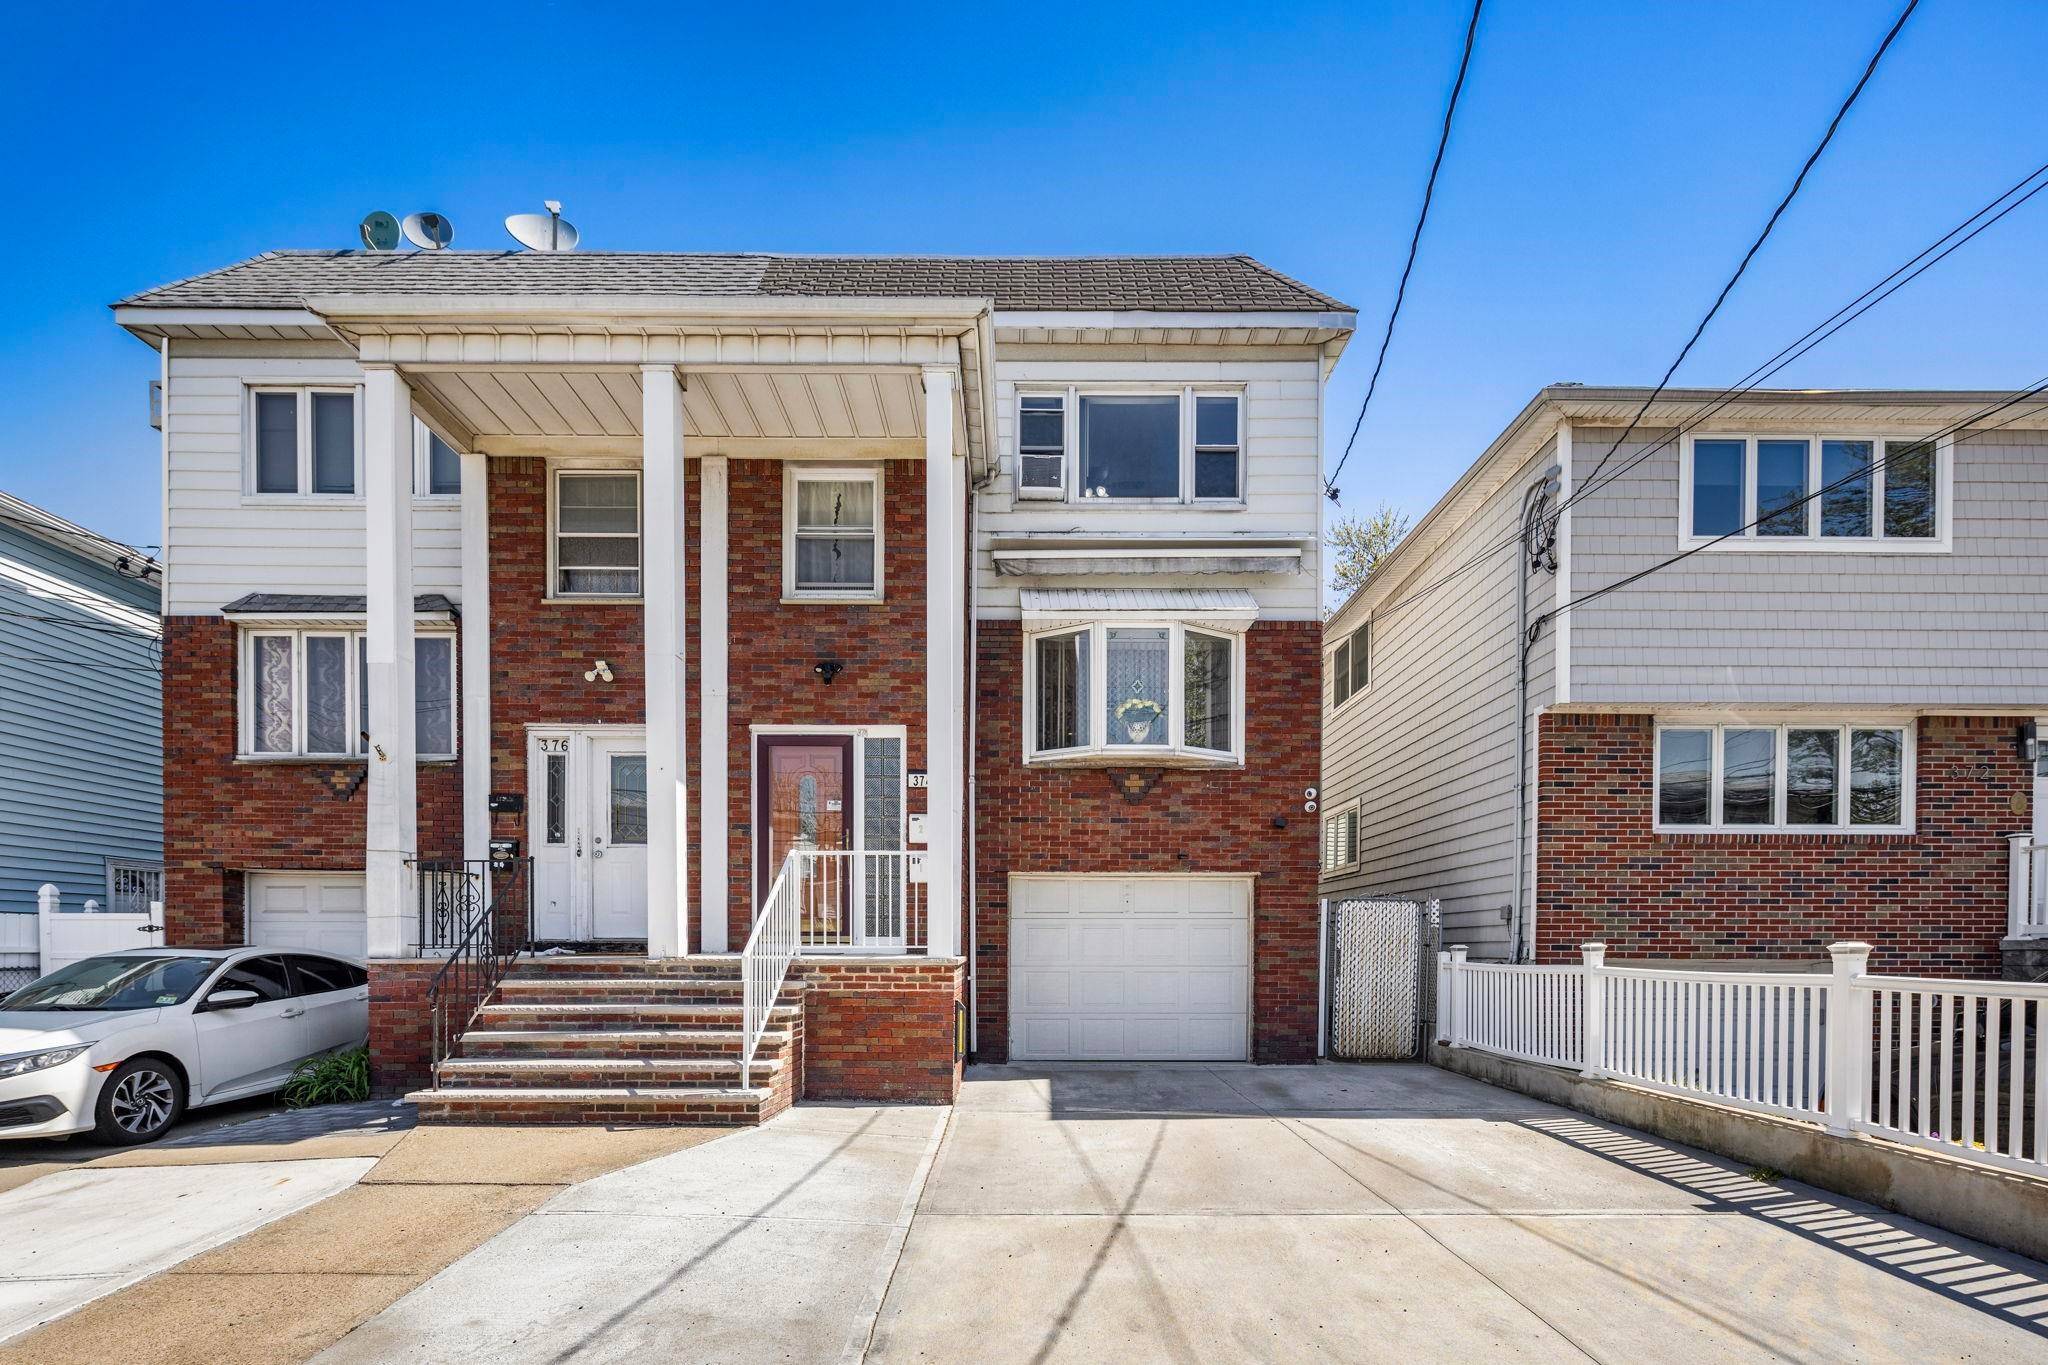 374 CATOR AVE Multi-Family New Jersey